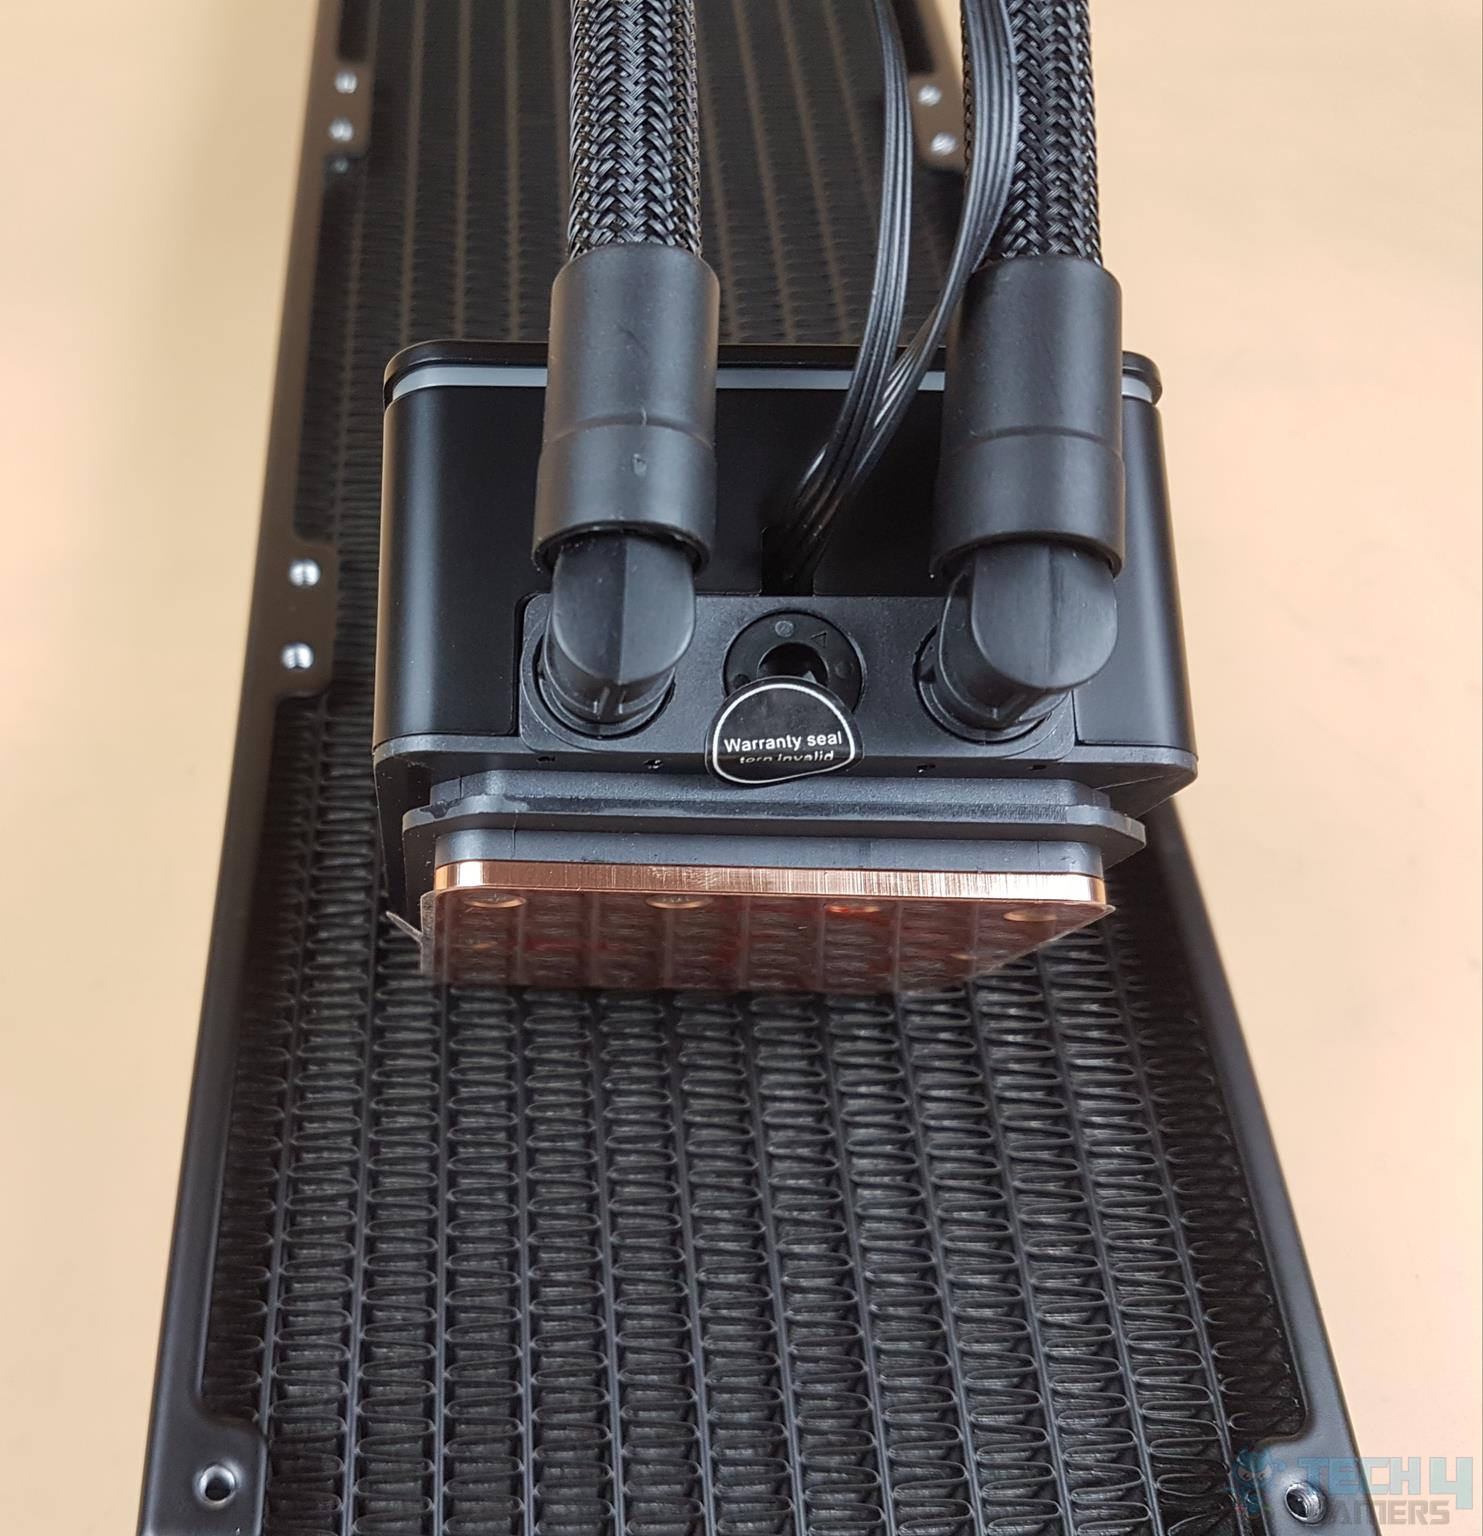 ALPHACOOL CORE OCEAN T38 AIO 360mm — The back side of the housing